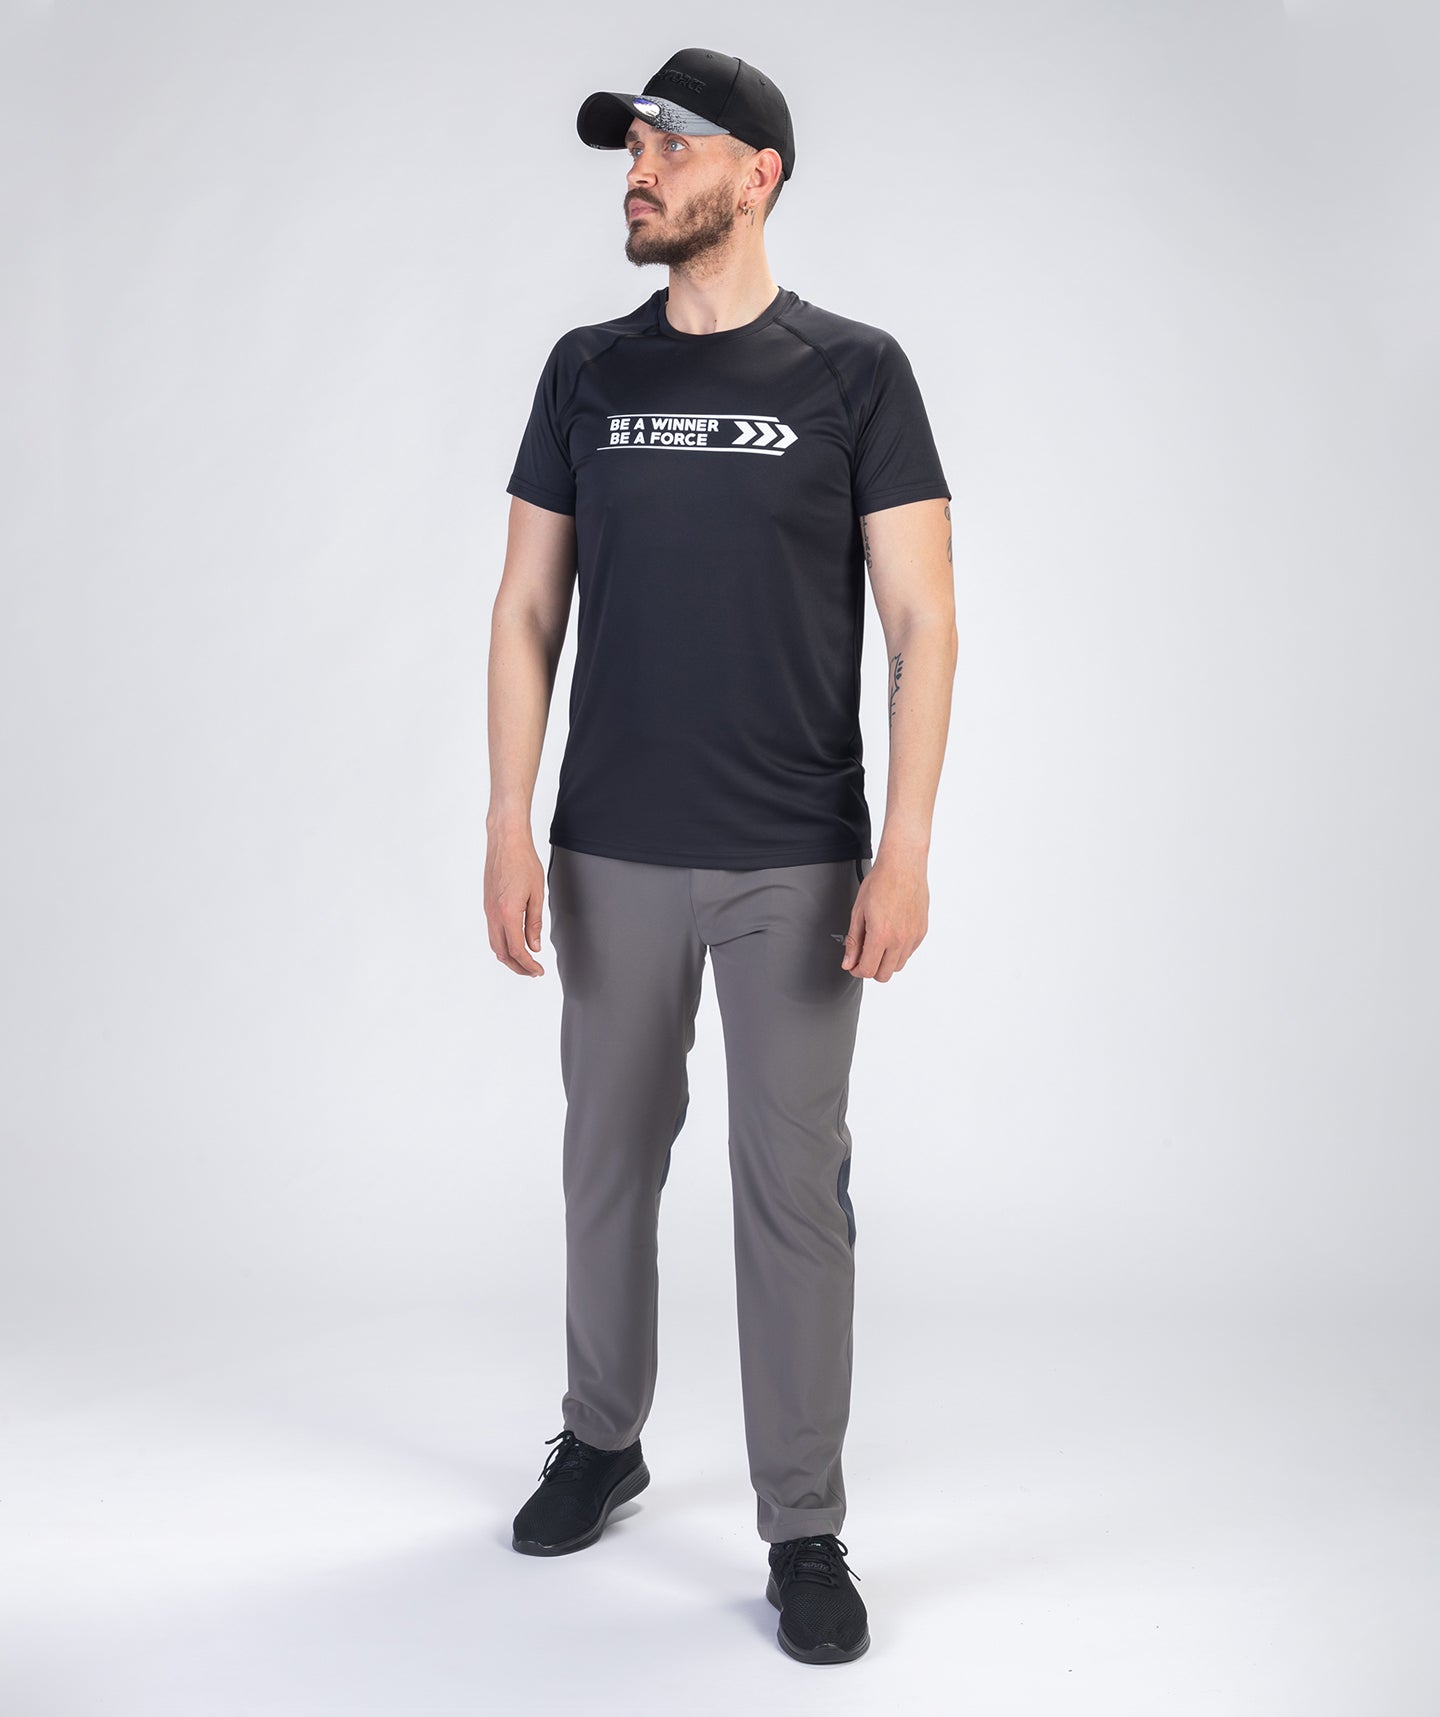 Our arrow tshirt help you look stylish at any occasion- It has a Manhattan slim fit that looks great on anybody.